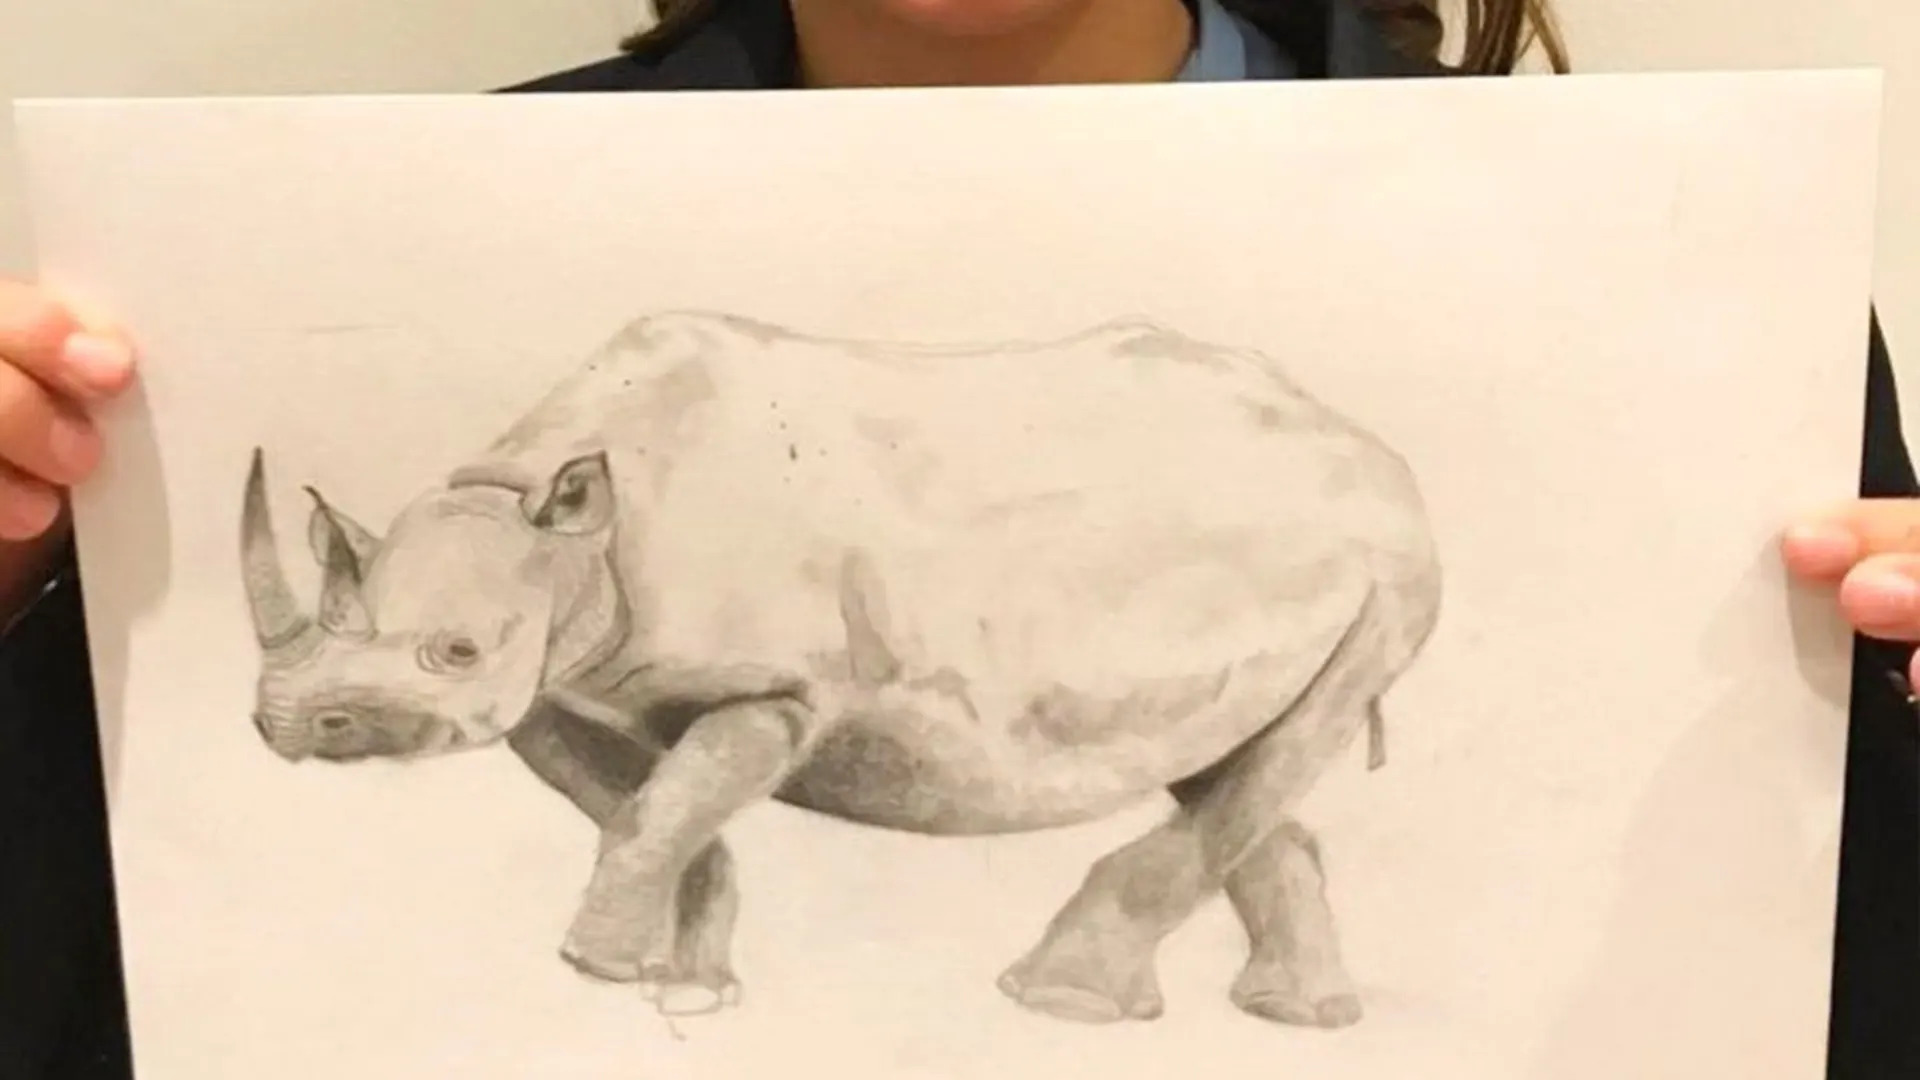 A child holds up a drawing of a rhino they have produced